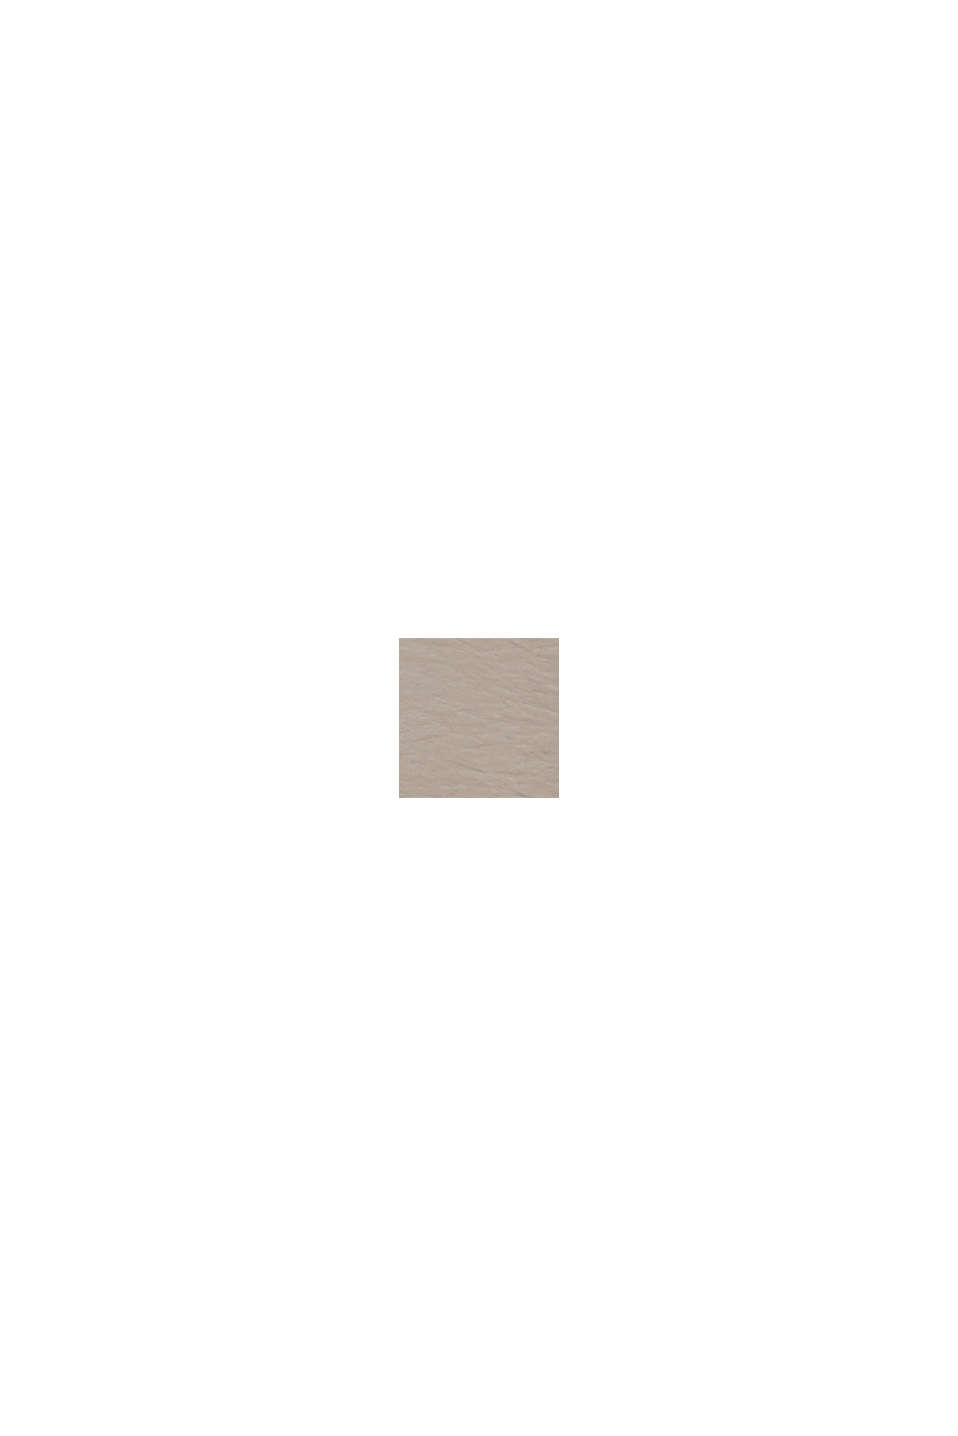 Abito in tessuto con coulisse, BEIGE, swatch